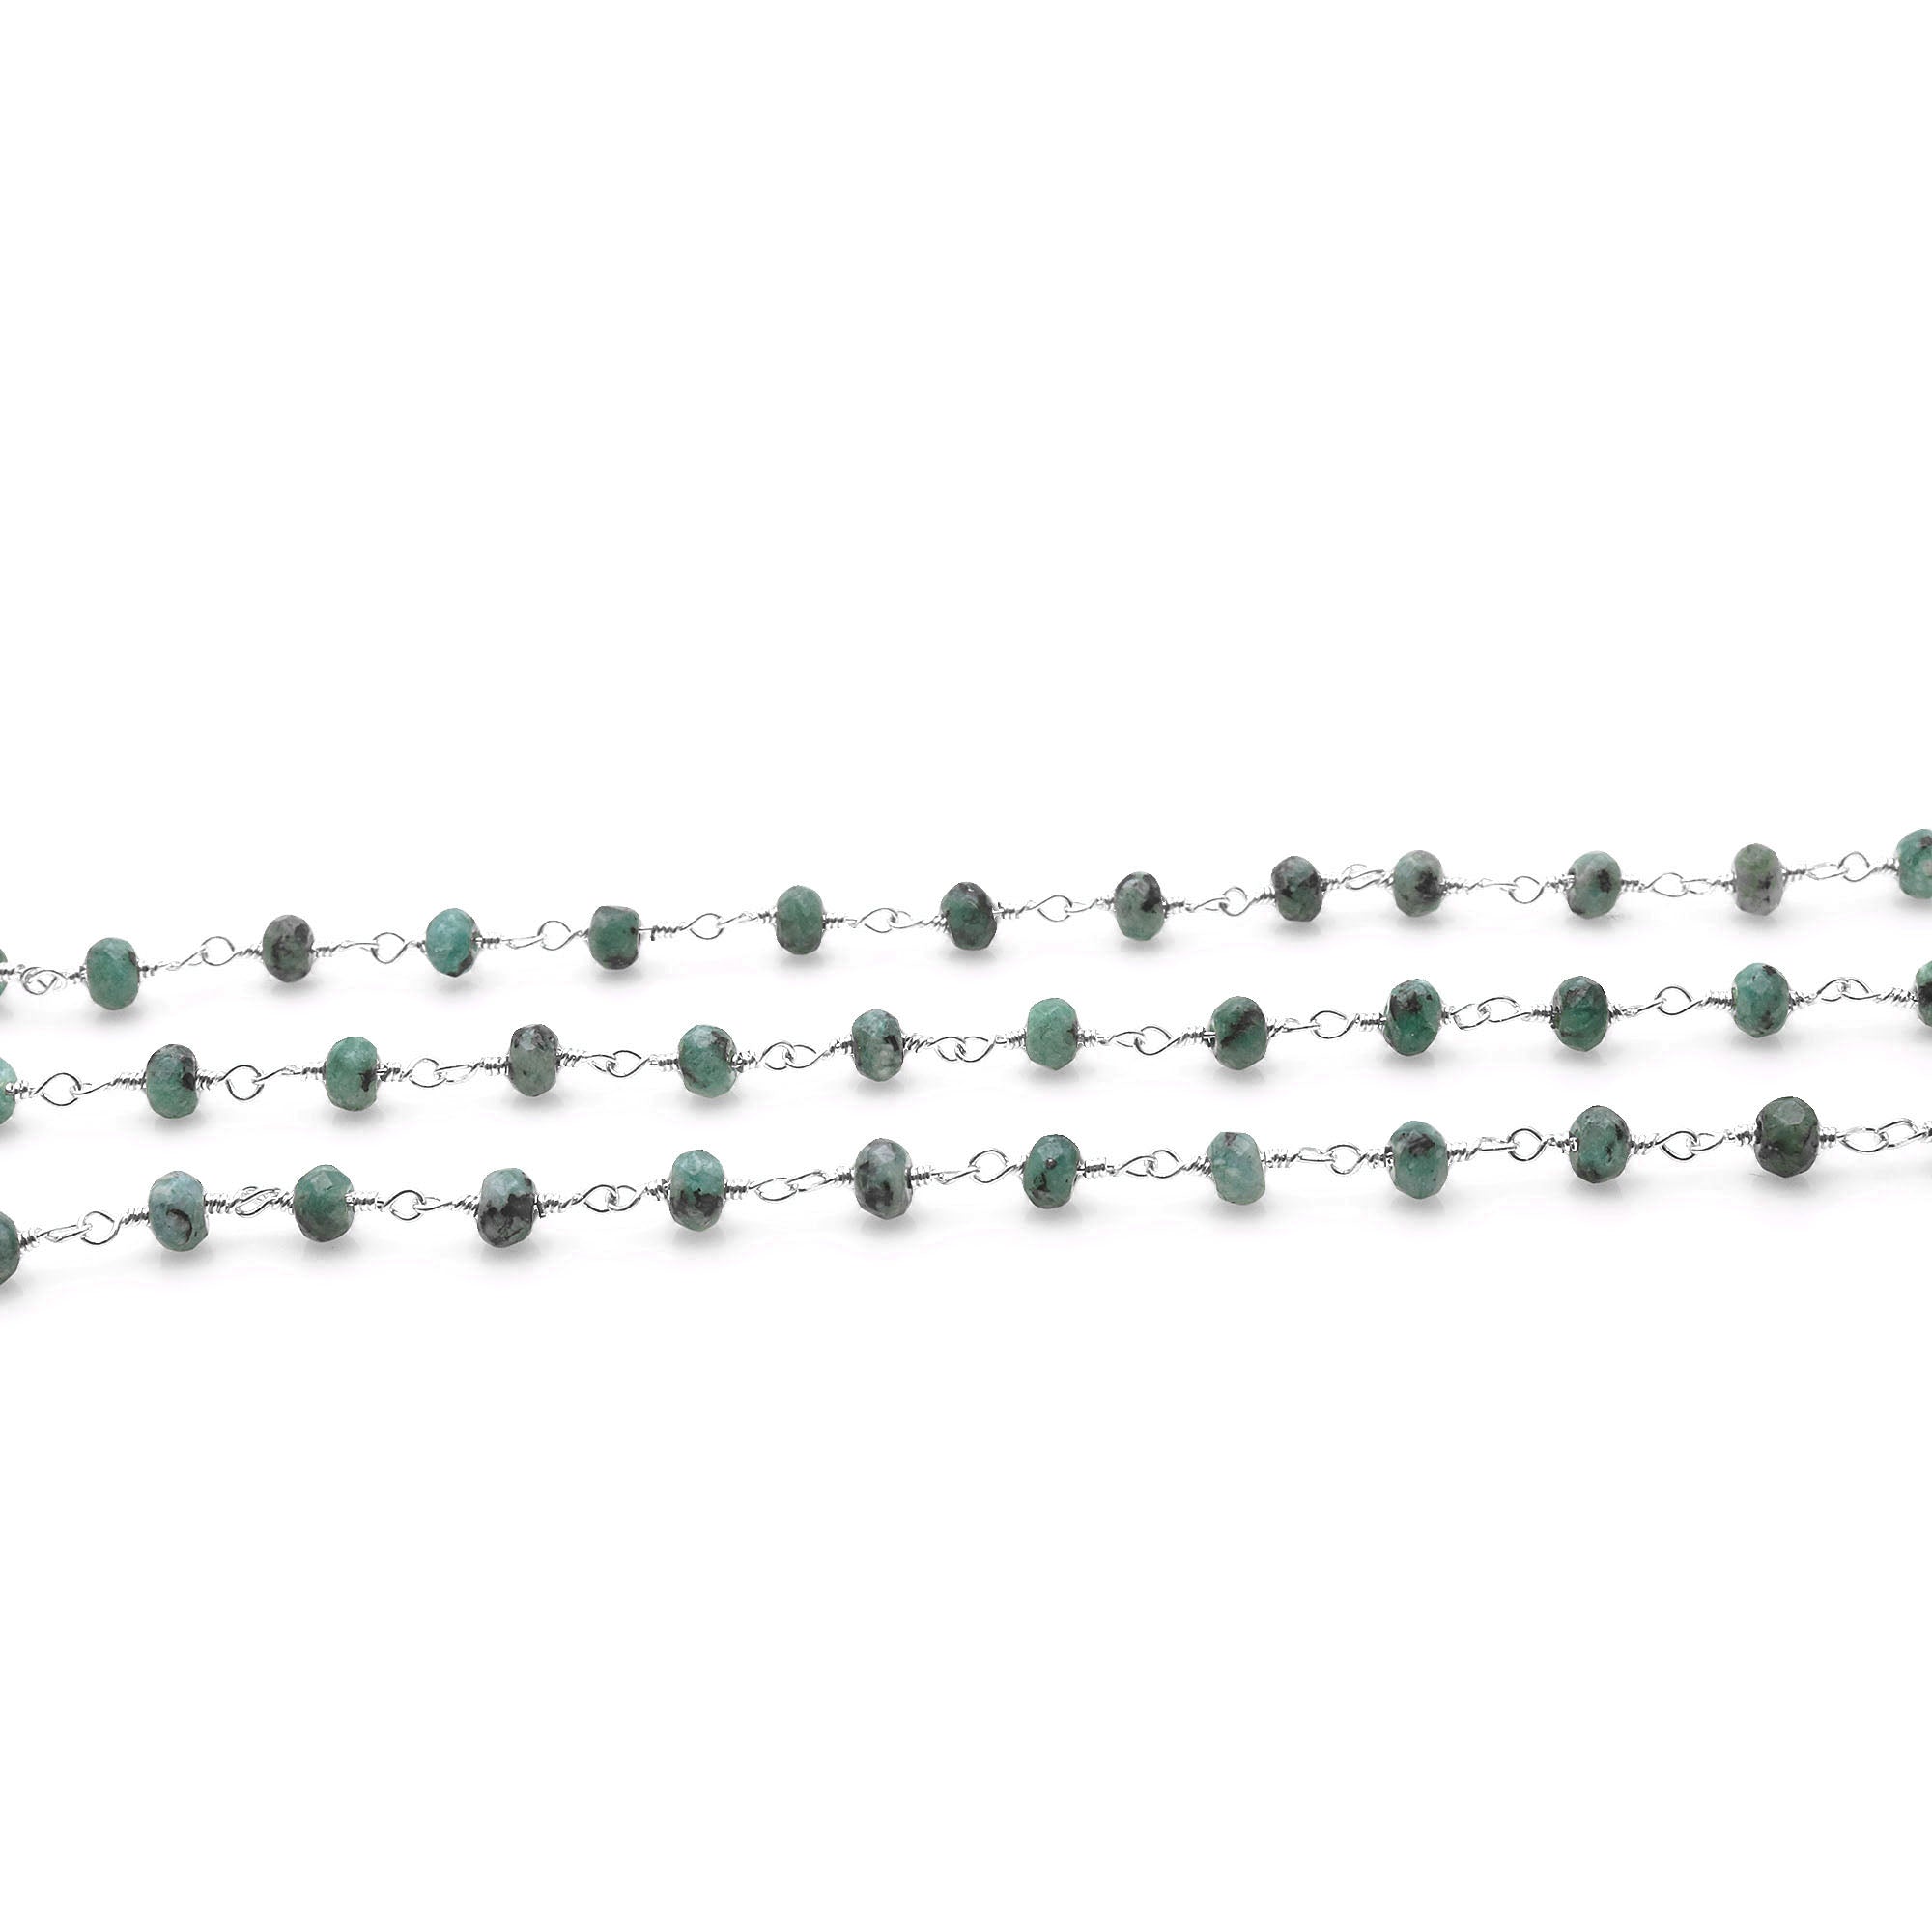 Chrysocolla Jade Faceted Beads 4mm Silver Plated Wire Wrapped Rosary Chain - GemMartUSA